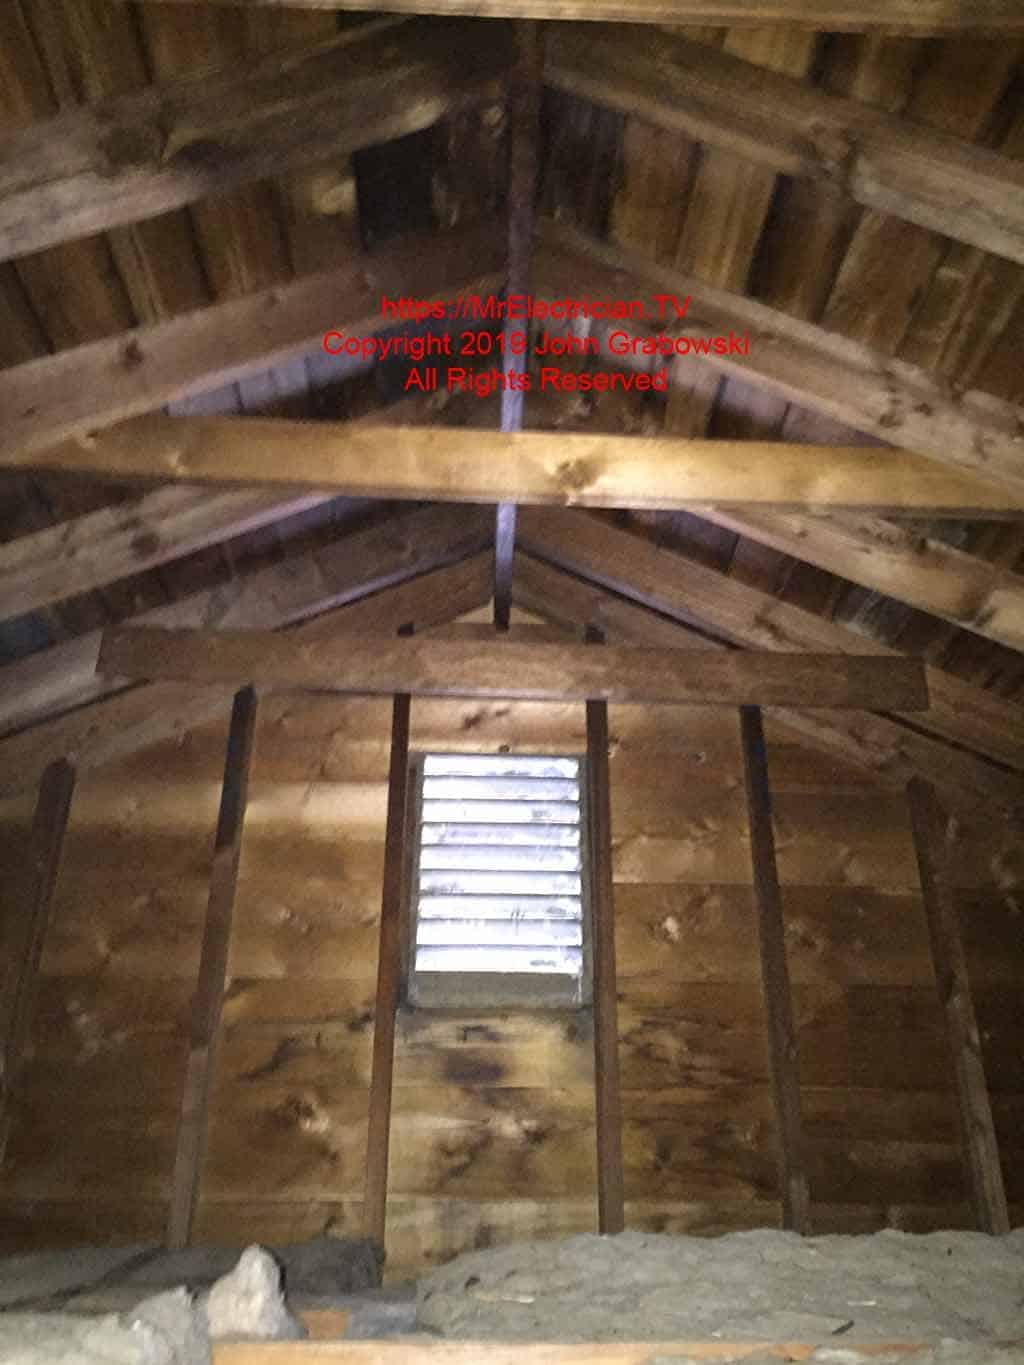 Attic space that was revealed after I cut the access hole